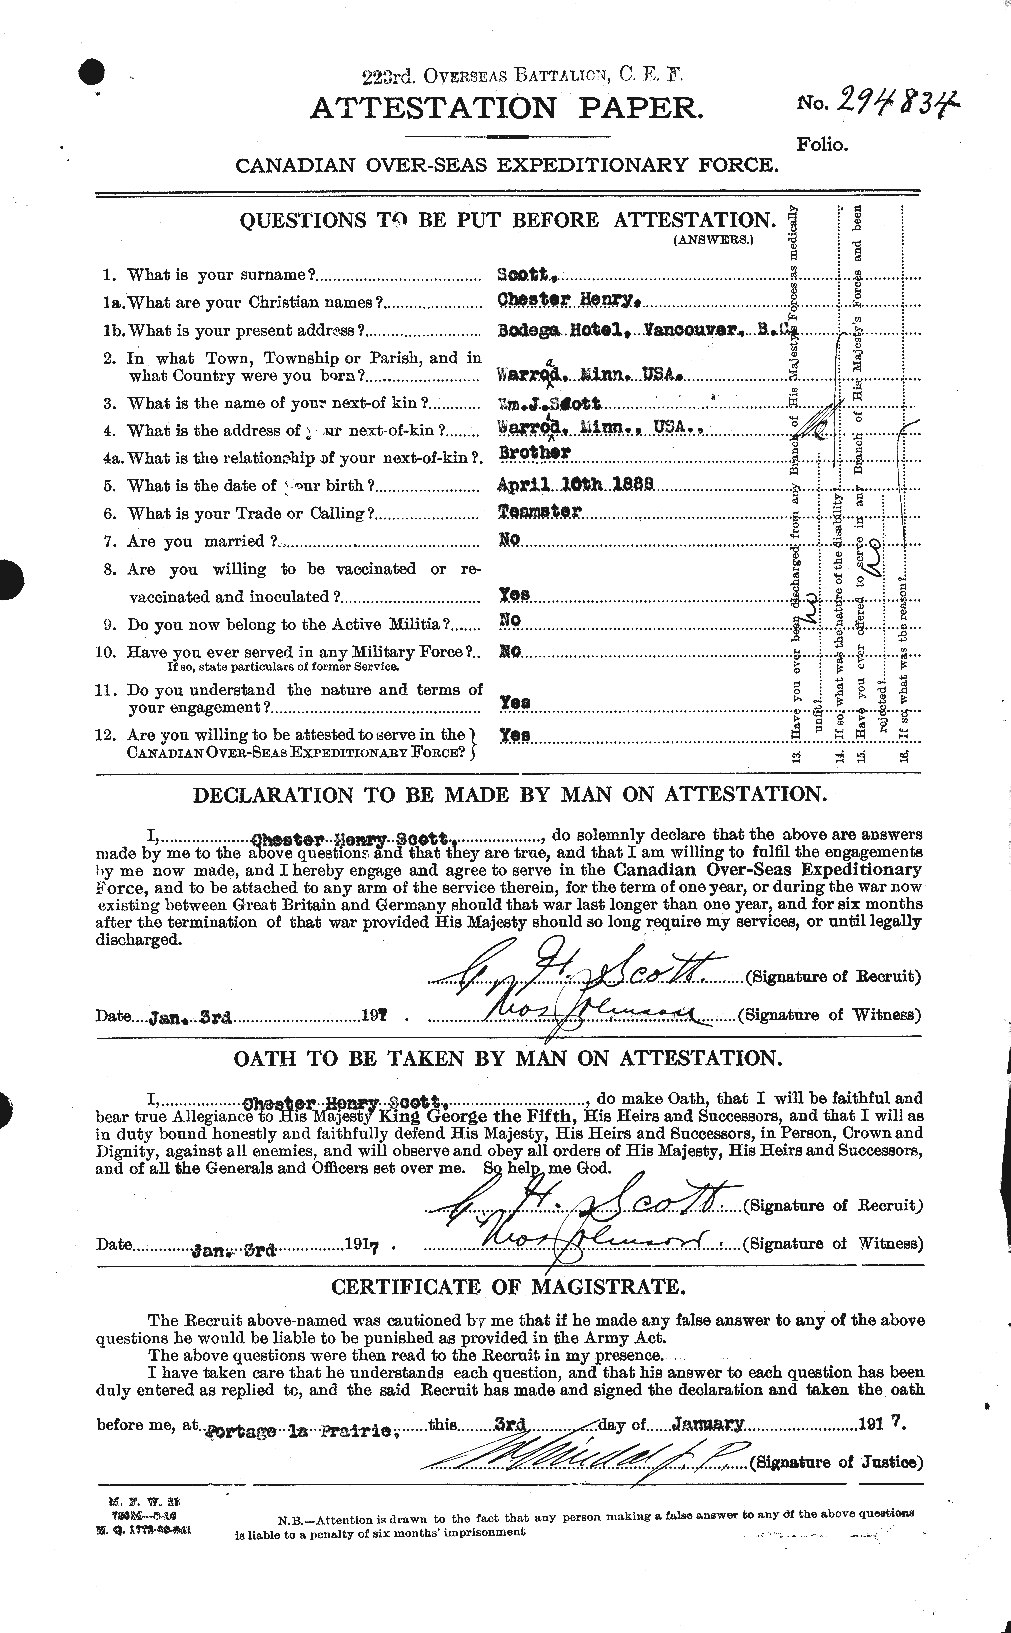 Personnel Records of the First World War - CEF 085866a